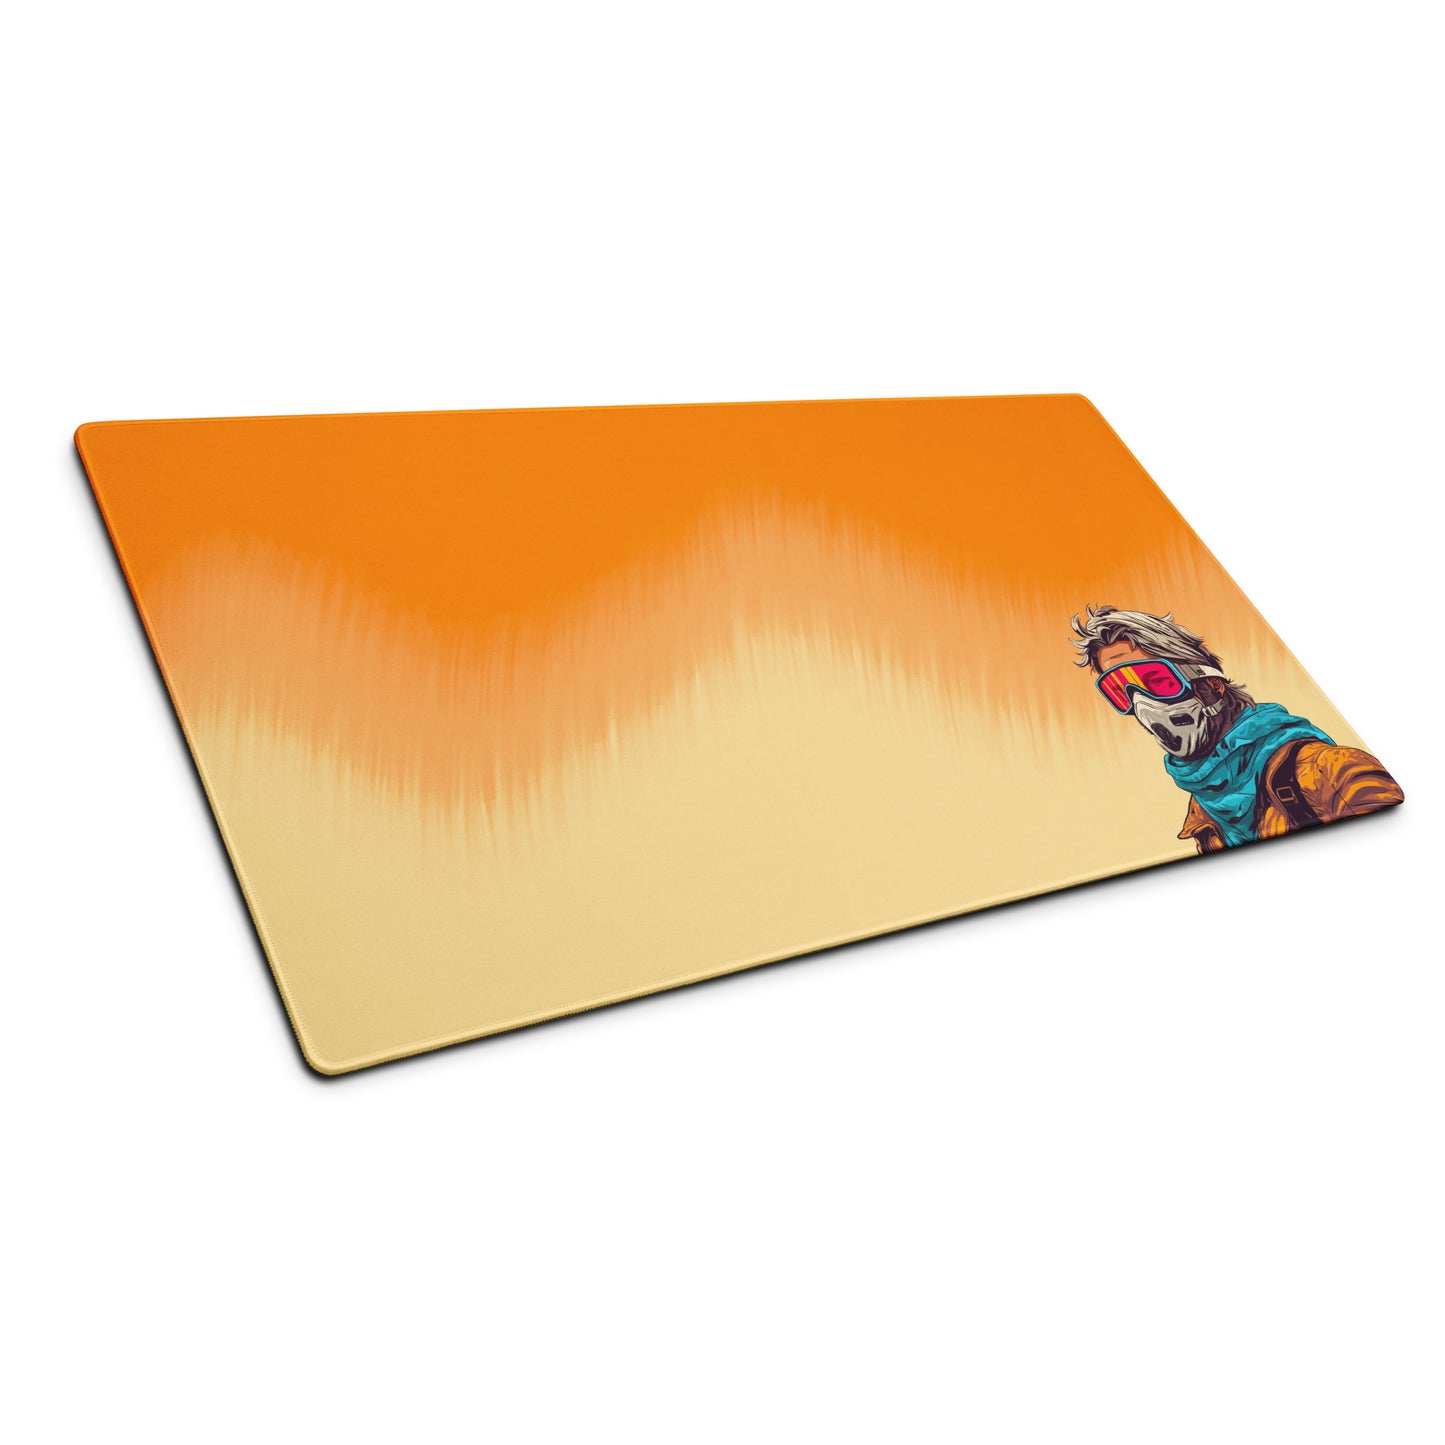 A 36" x 18" desk pad with a man standing in a sandstorm sitting at an angle.